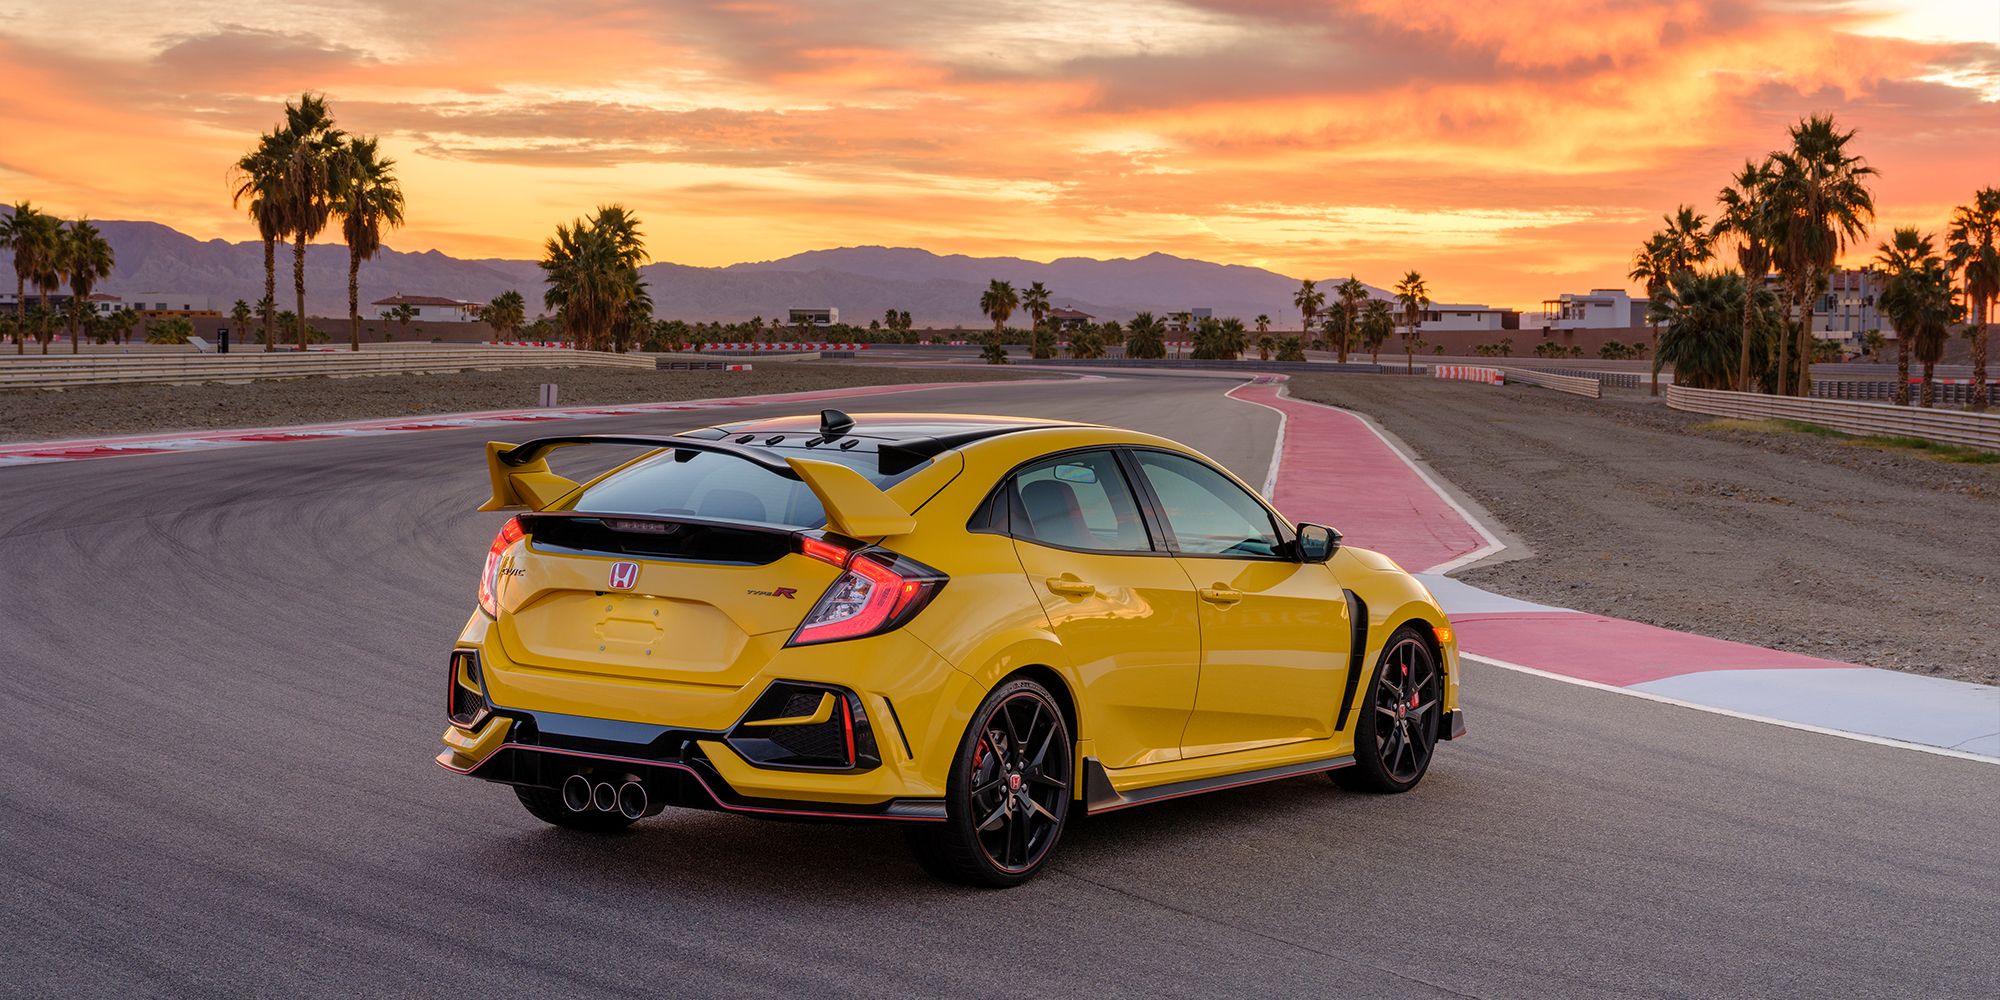 The rear of the Civic Type R Limited Edition